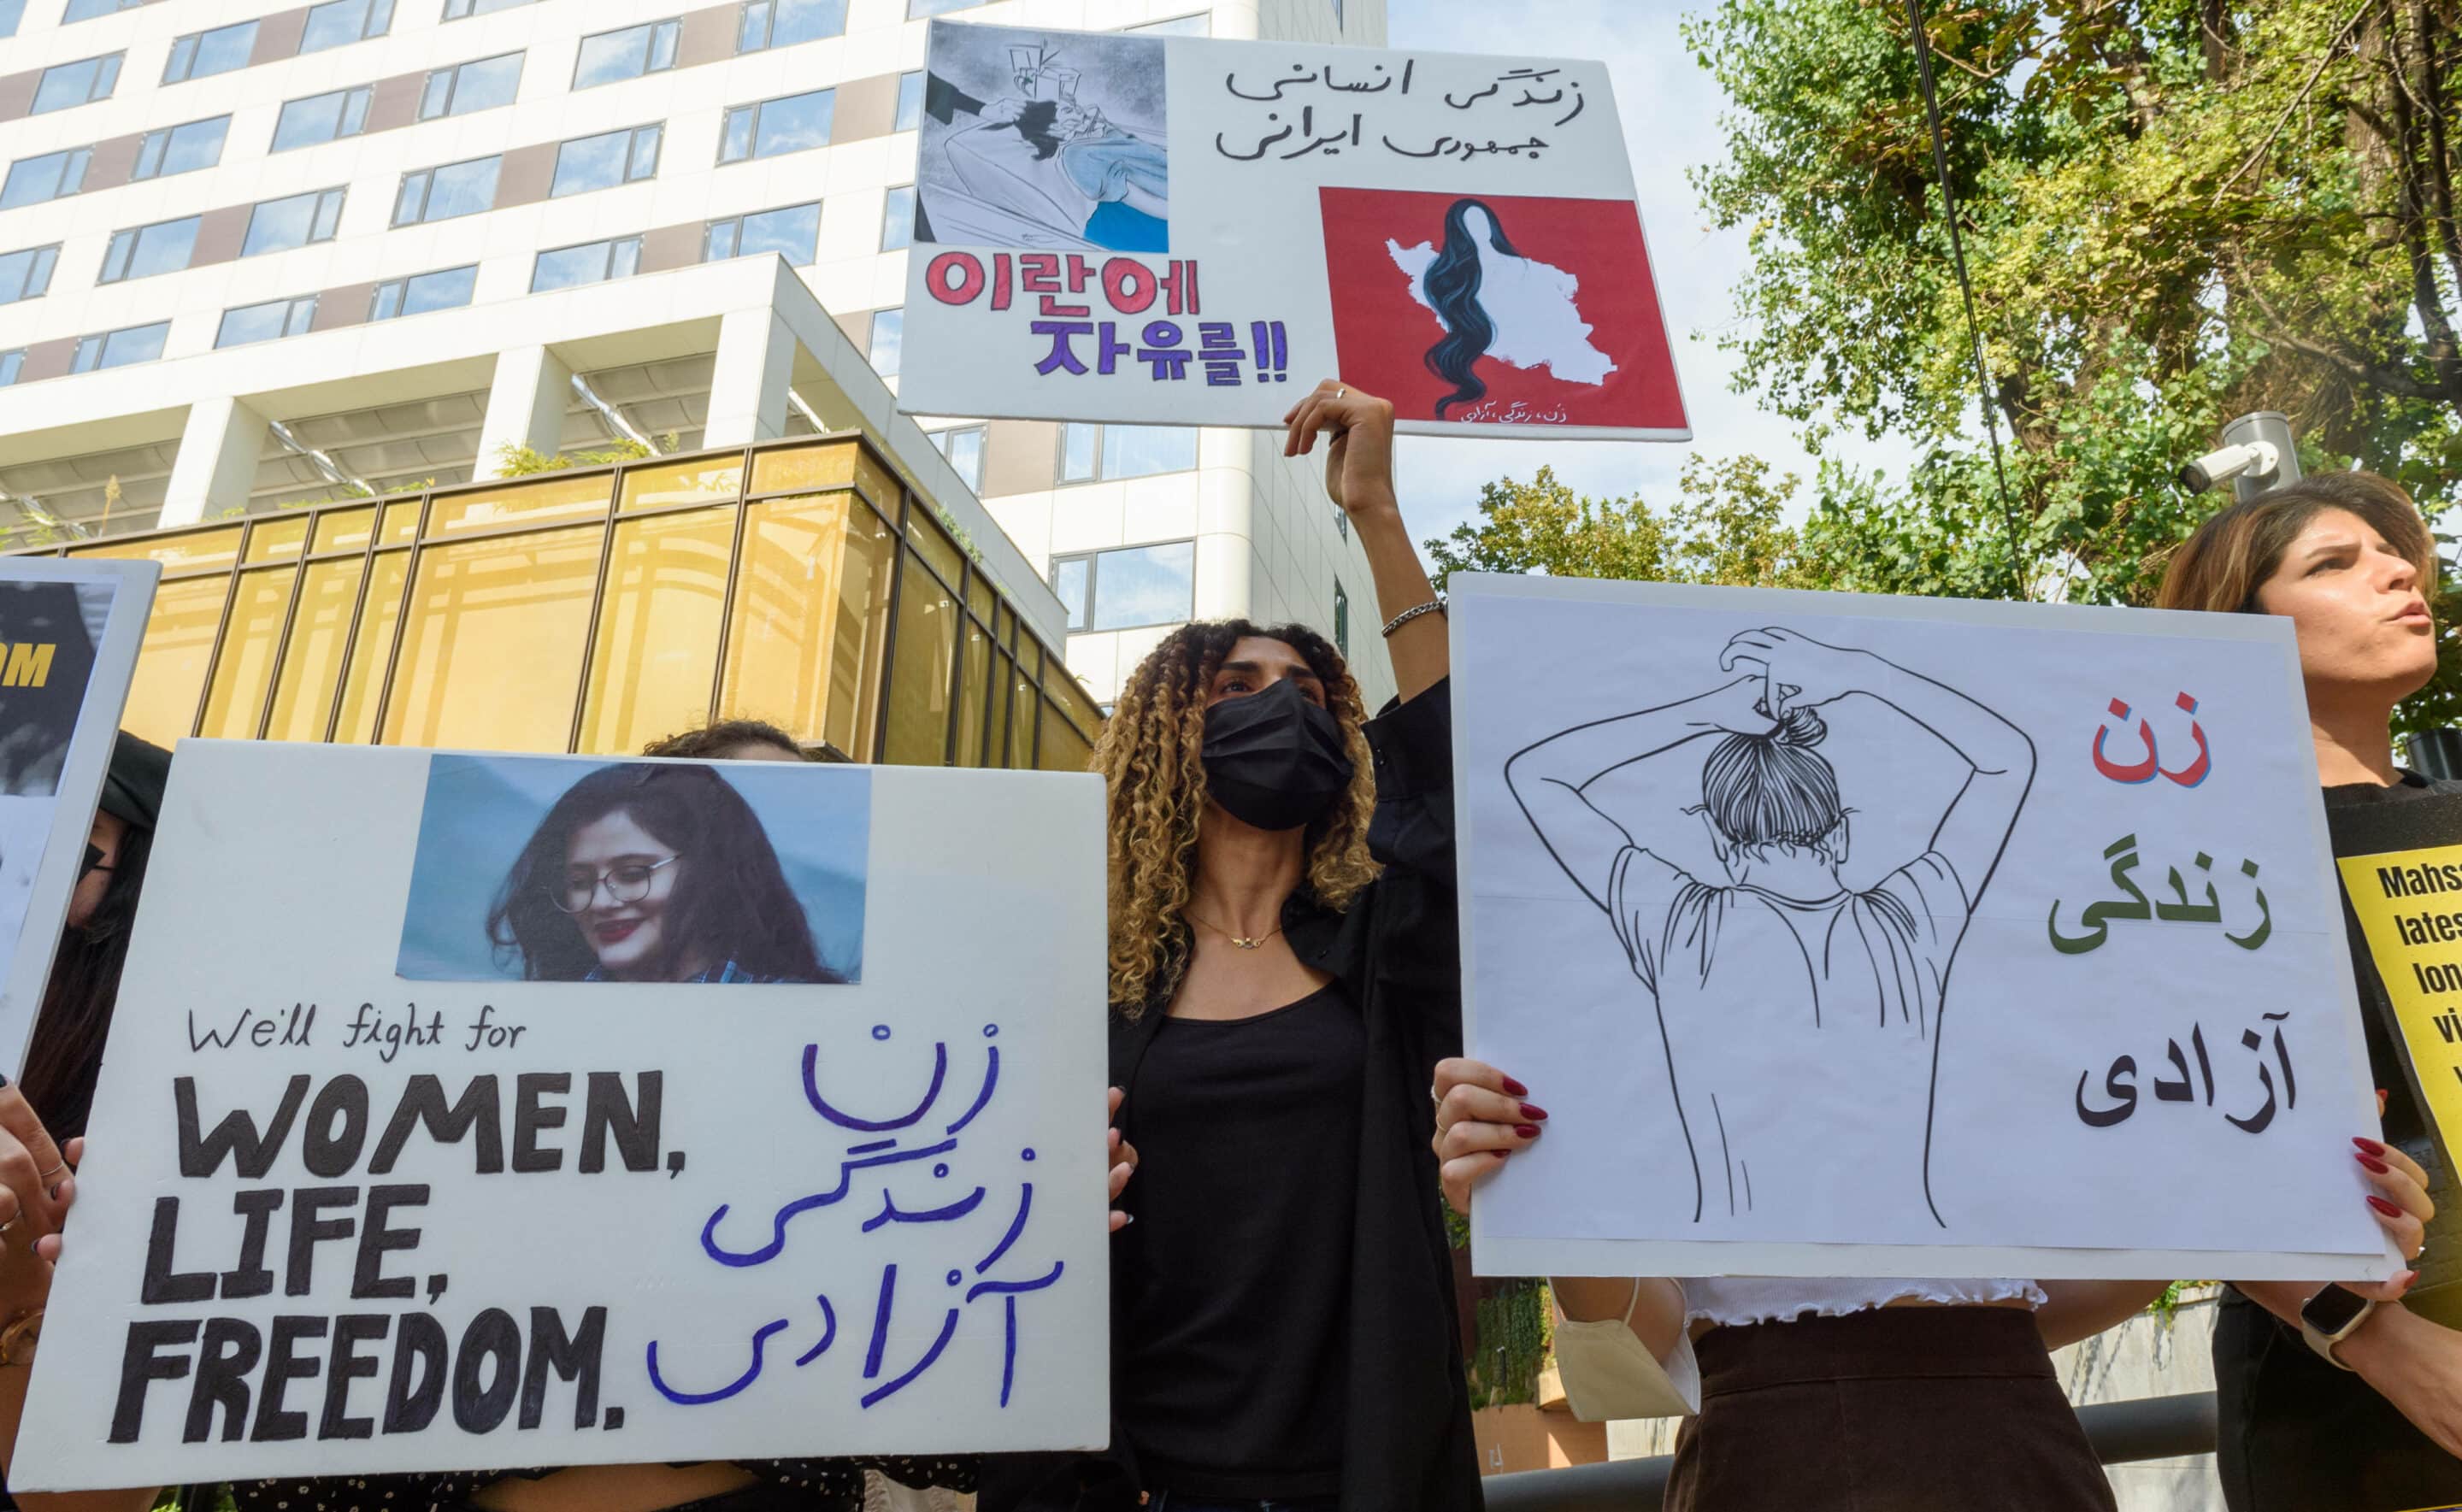 Iranian protesters hold placards expressing their opinion during a rally against the death of Iranian Mahsa Amini outside the  Embassy of the Islamic Republic of Iran in Seoul. Iranian protesters staged a rally criticizing the Iranian government's strong crackdown on local protests involving the sudden death of Mahsa Amini, who had been arrested in Tehran for allegedly violating the strict law requiring women to cover their hair with a hijab, or headscarf, earlier this month. - Kim Jae-Hwan / SOPA Images//SOPAIMAGES_sopa0155/2209281714/Credit:SOPA Images/SIPA/2209281722